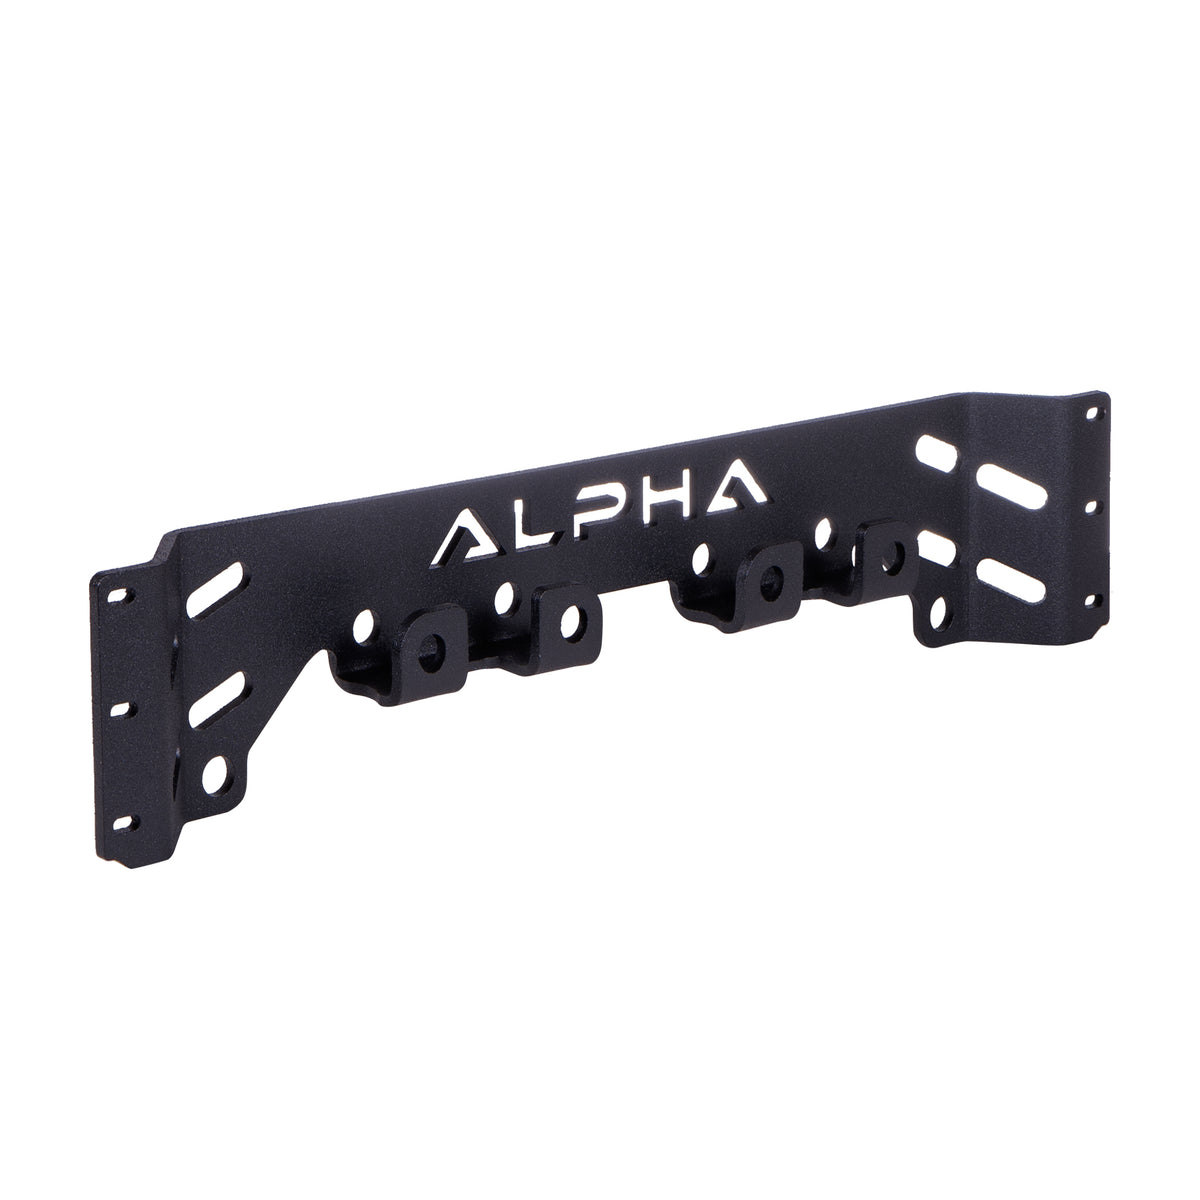 Alpha Adapt Claw Side Panel Plate